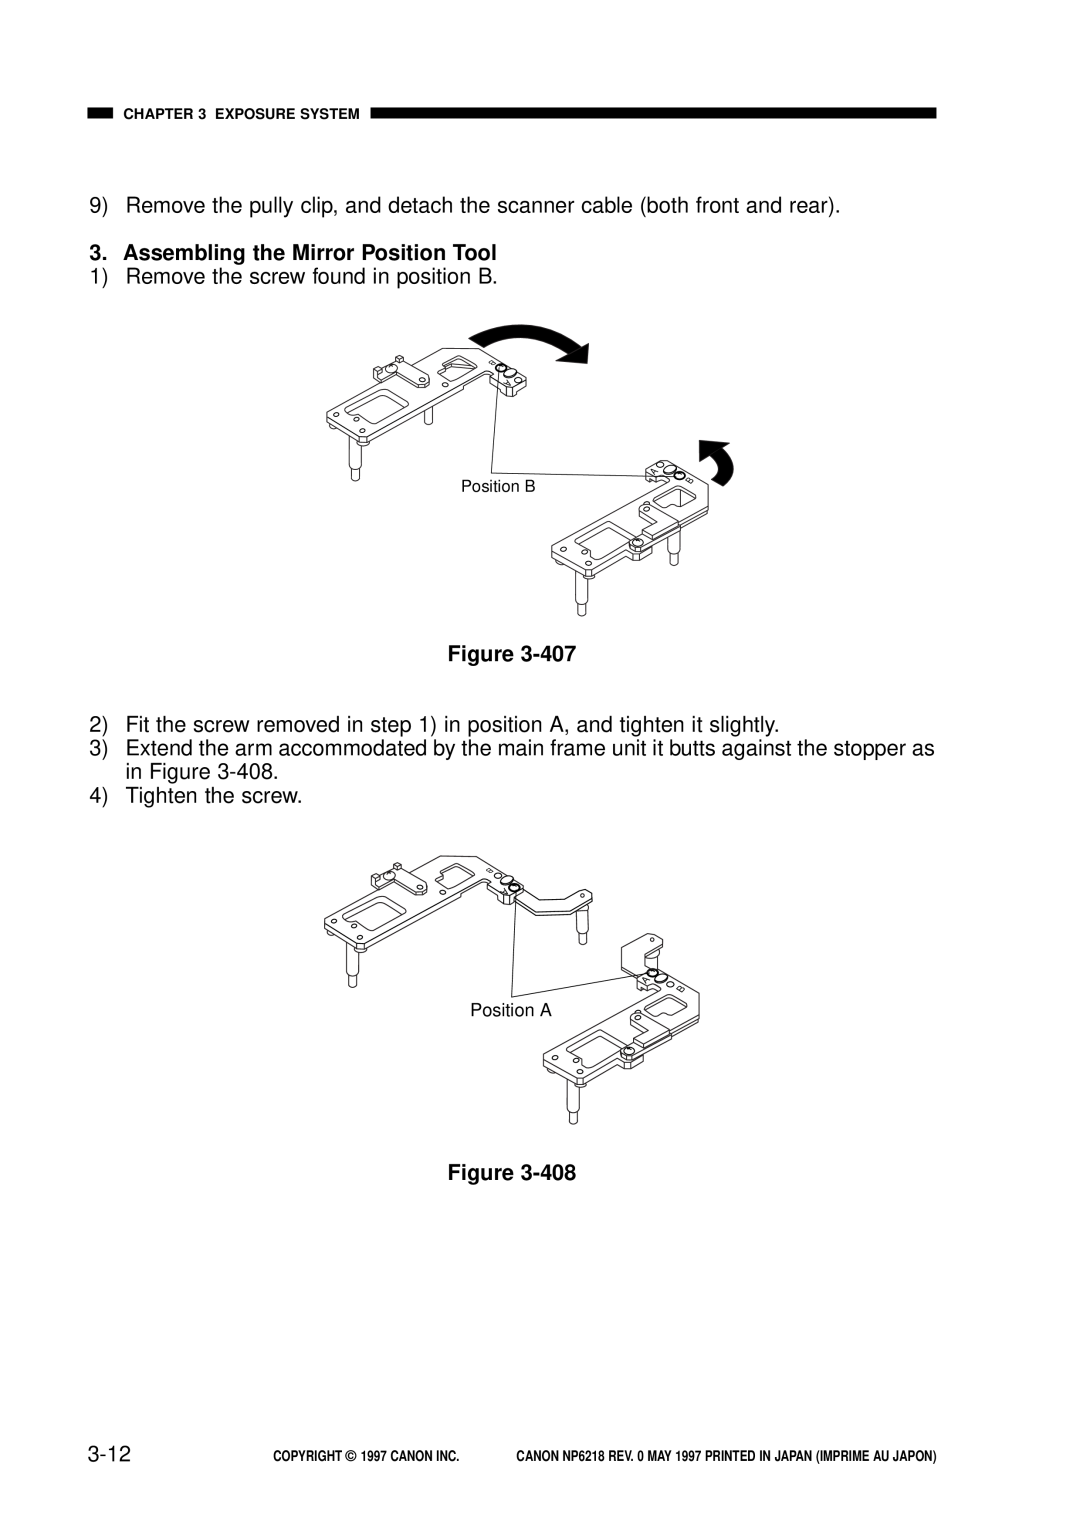 Canon FY8-13EX-000, NP6218 service manual Assembling the Mirror Position Tool, 3-12 